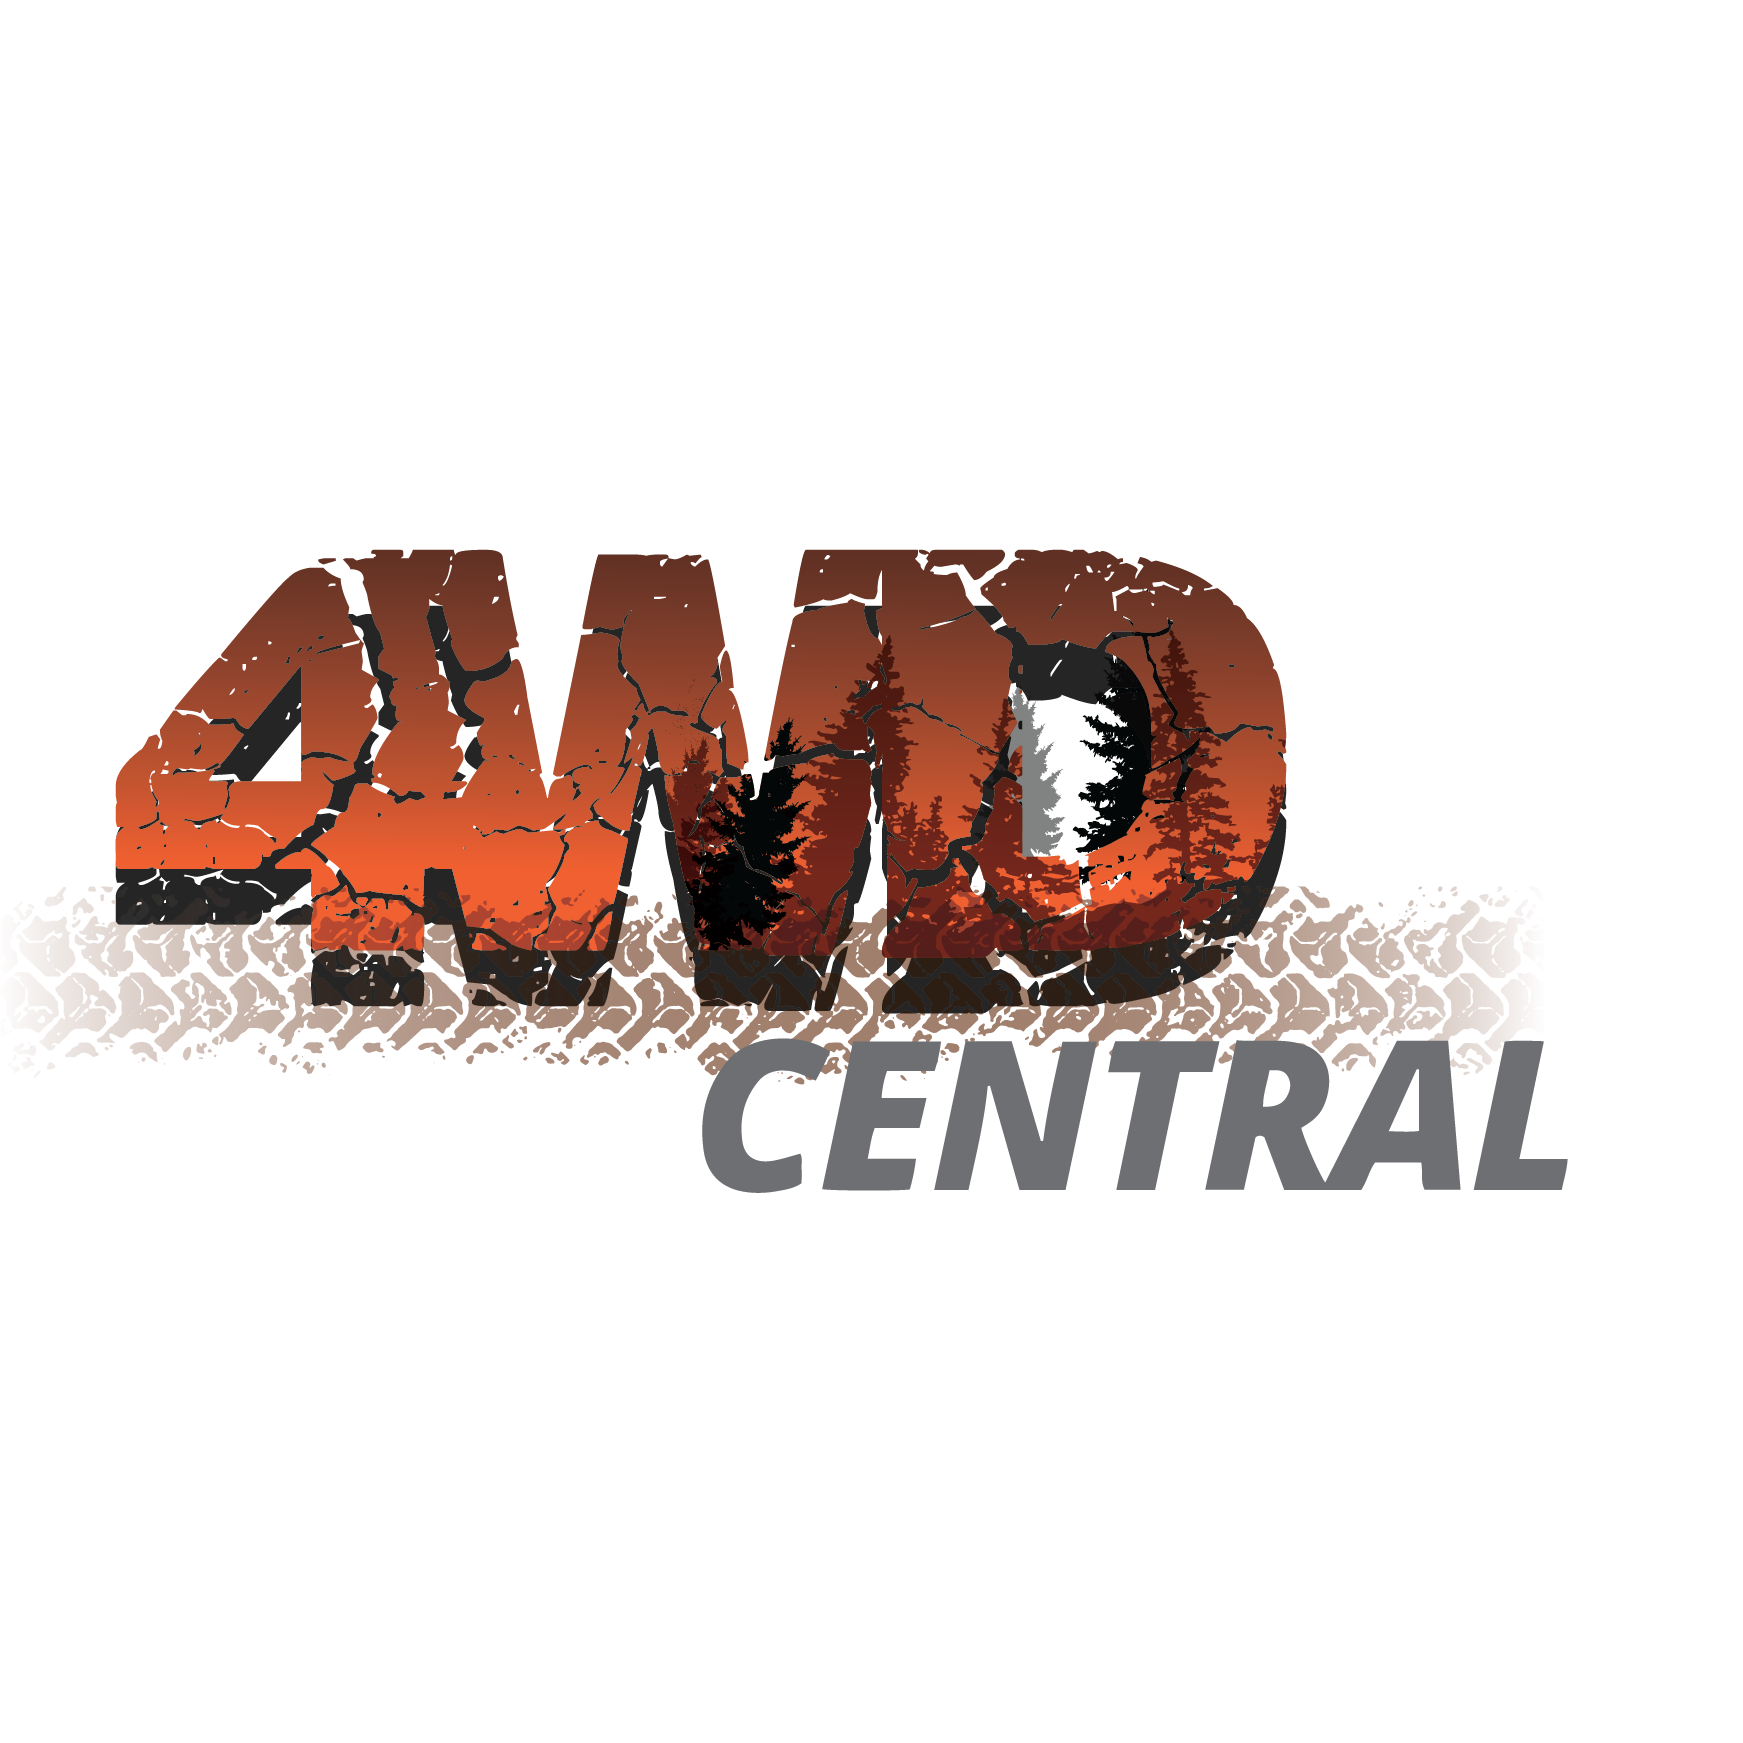 4WD Central - 4WD Central Gift Card -